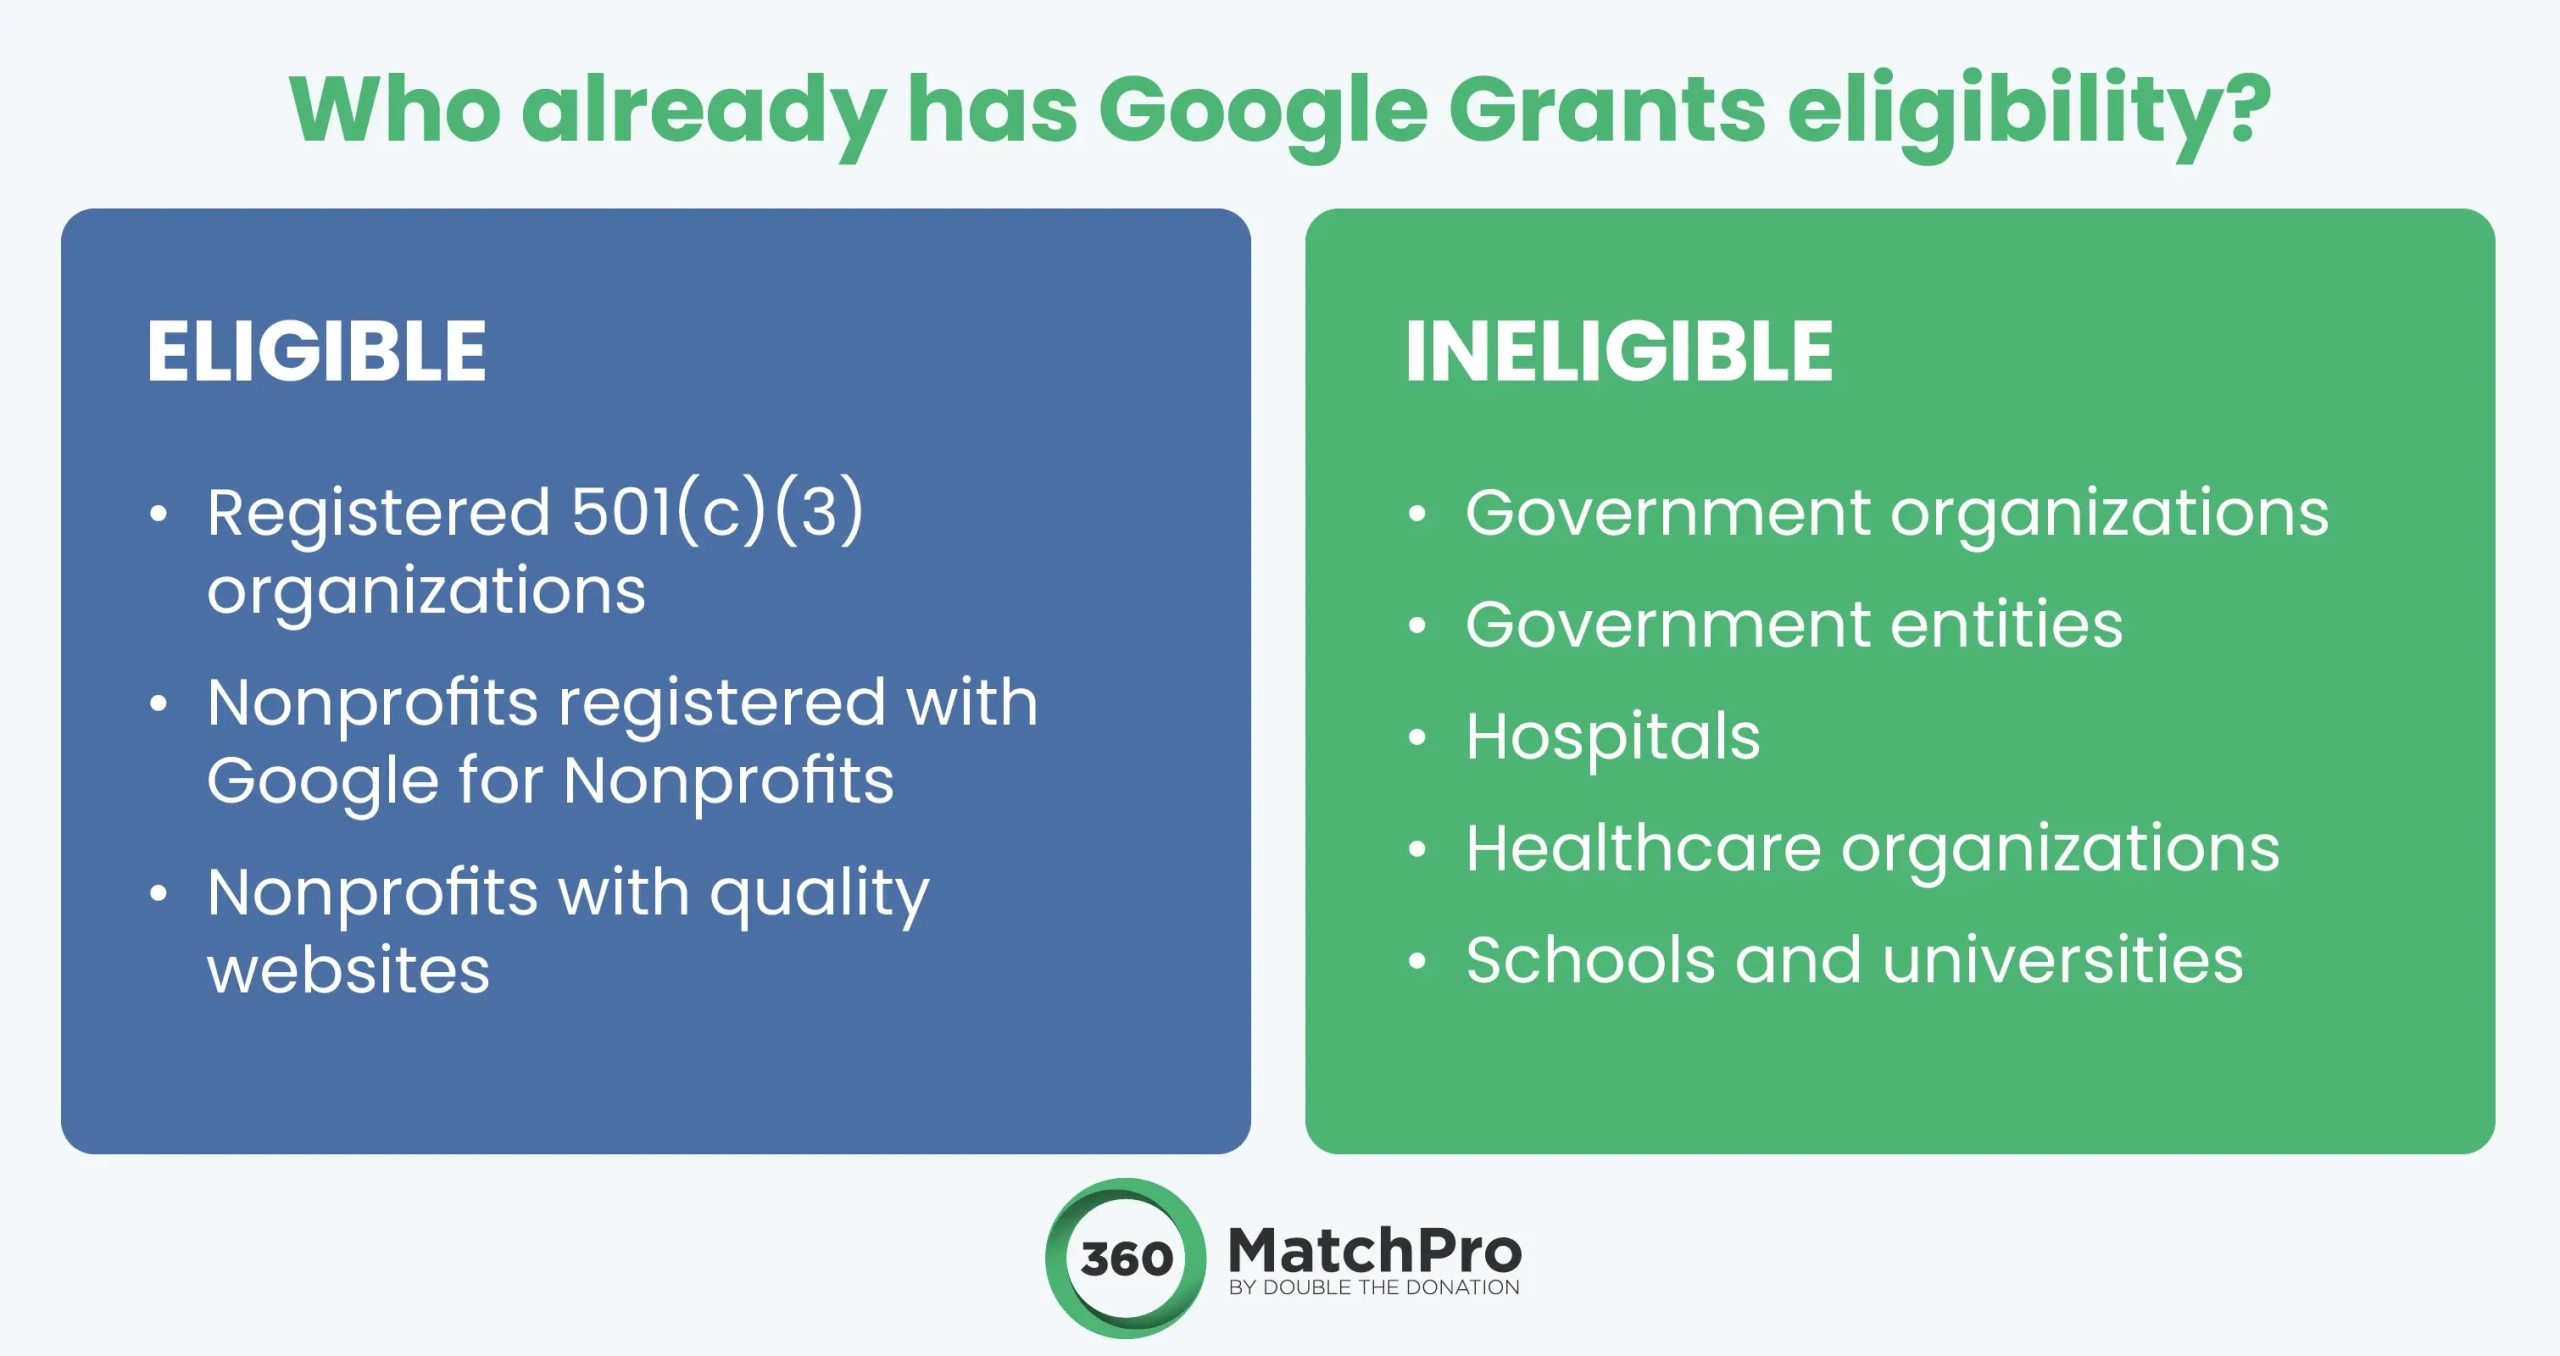 An infographic explaining which organizations have Google Grants eligibility and which are ineligible.